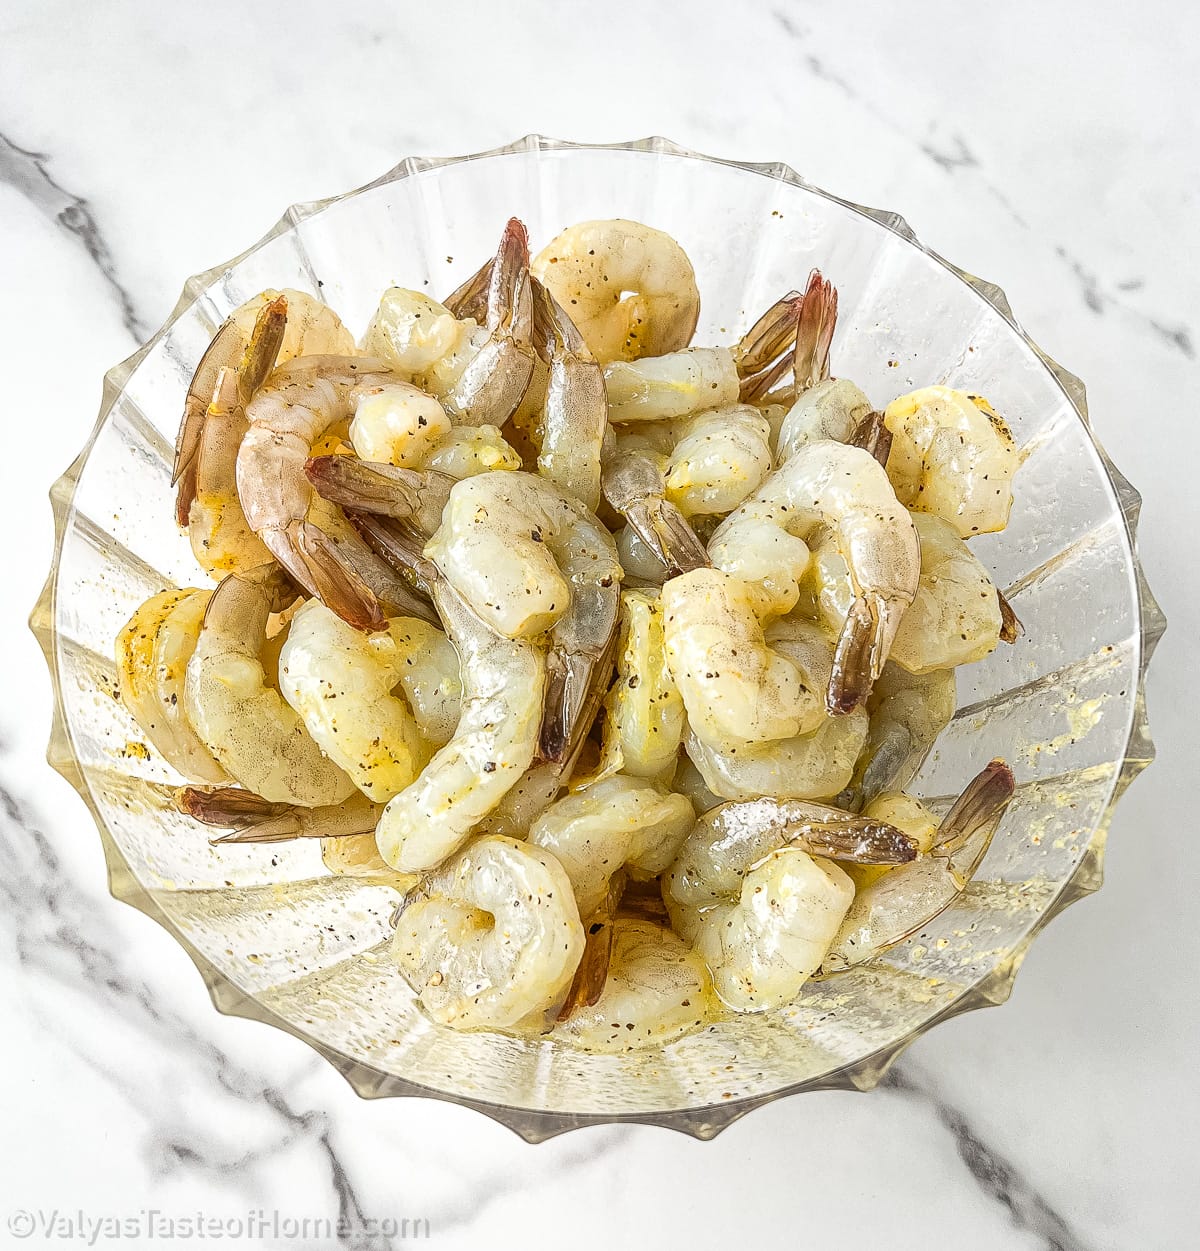 Use your hands or a spoon to mix the seasonings into the shrimp, and make sure that they are evenly coated.